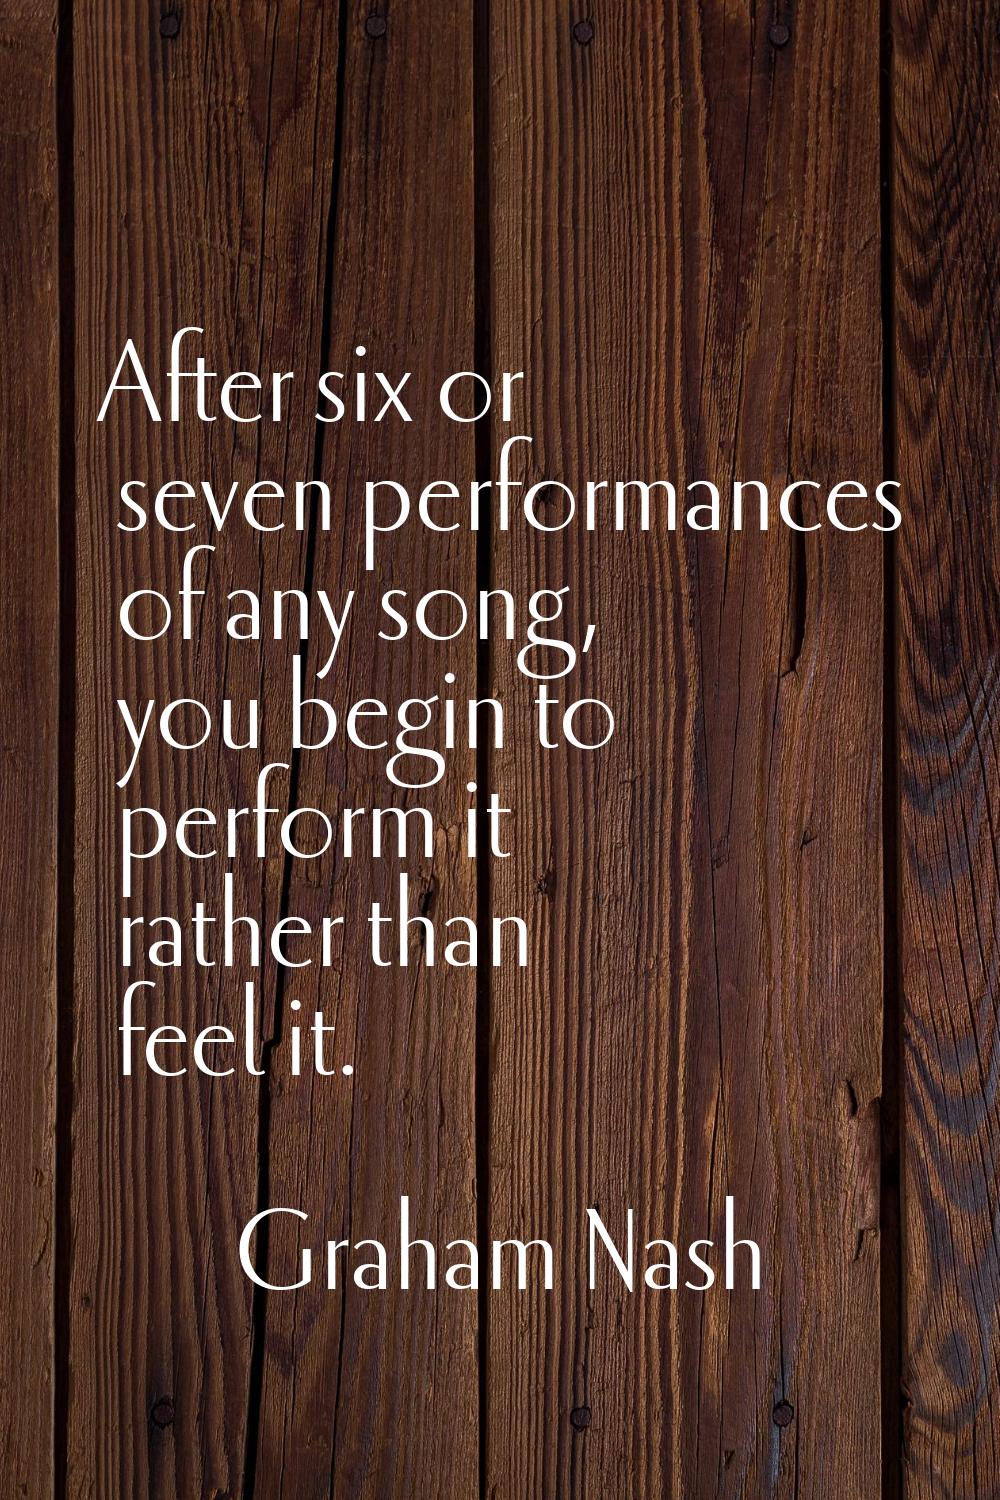 After six or seven performances of any song, you begin to perform it rather than feel it.